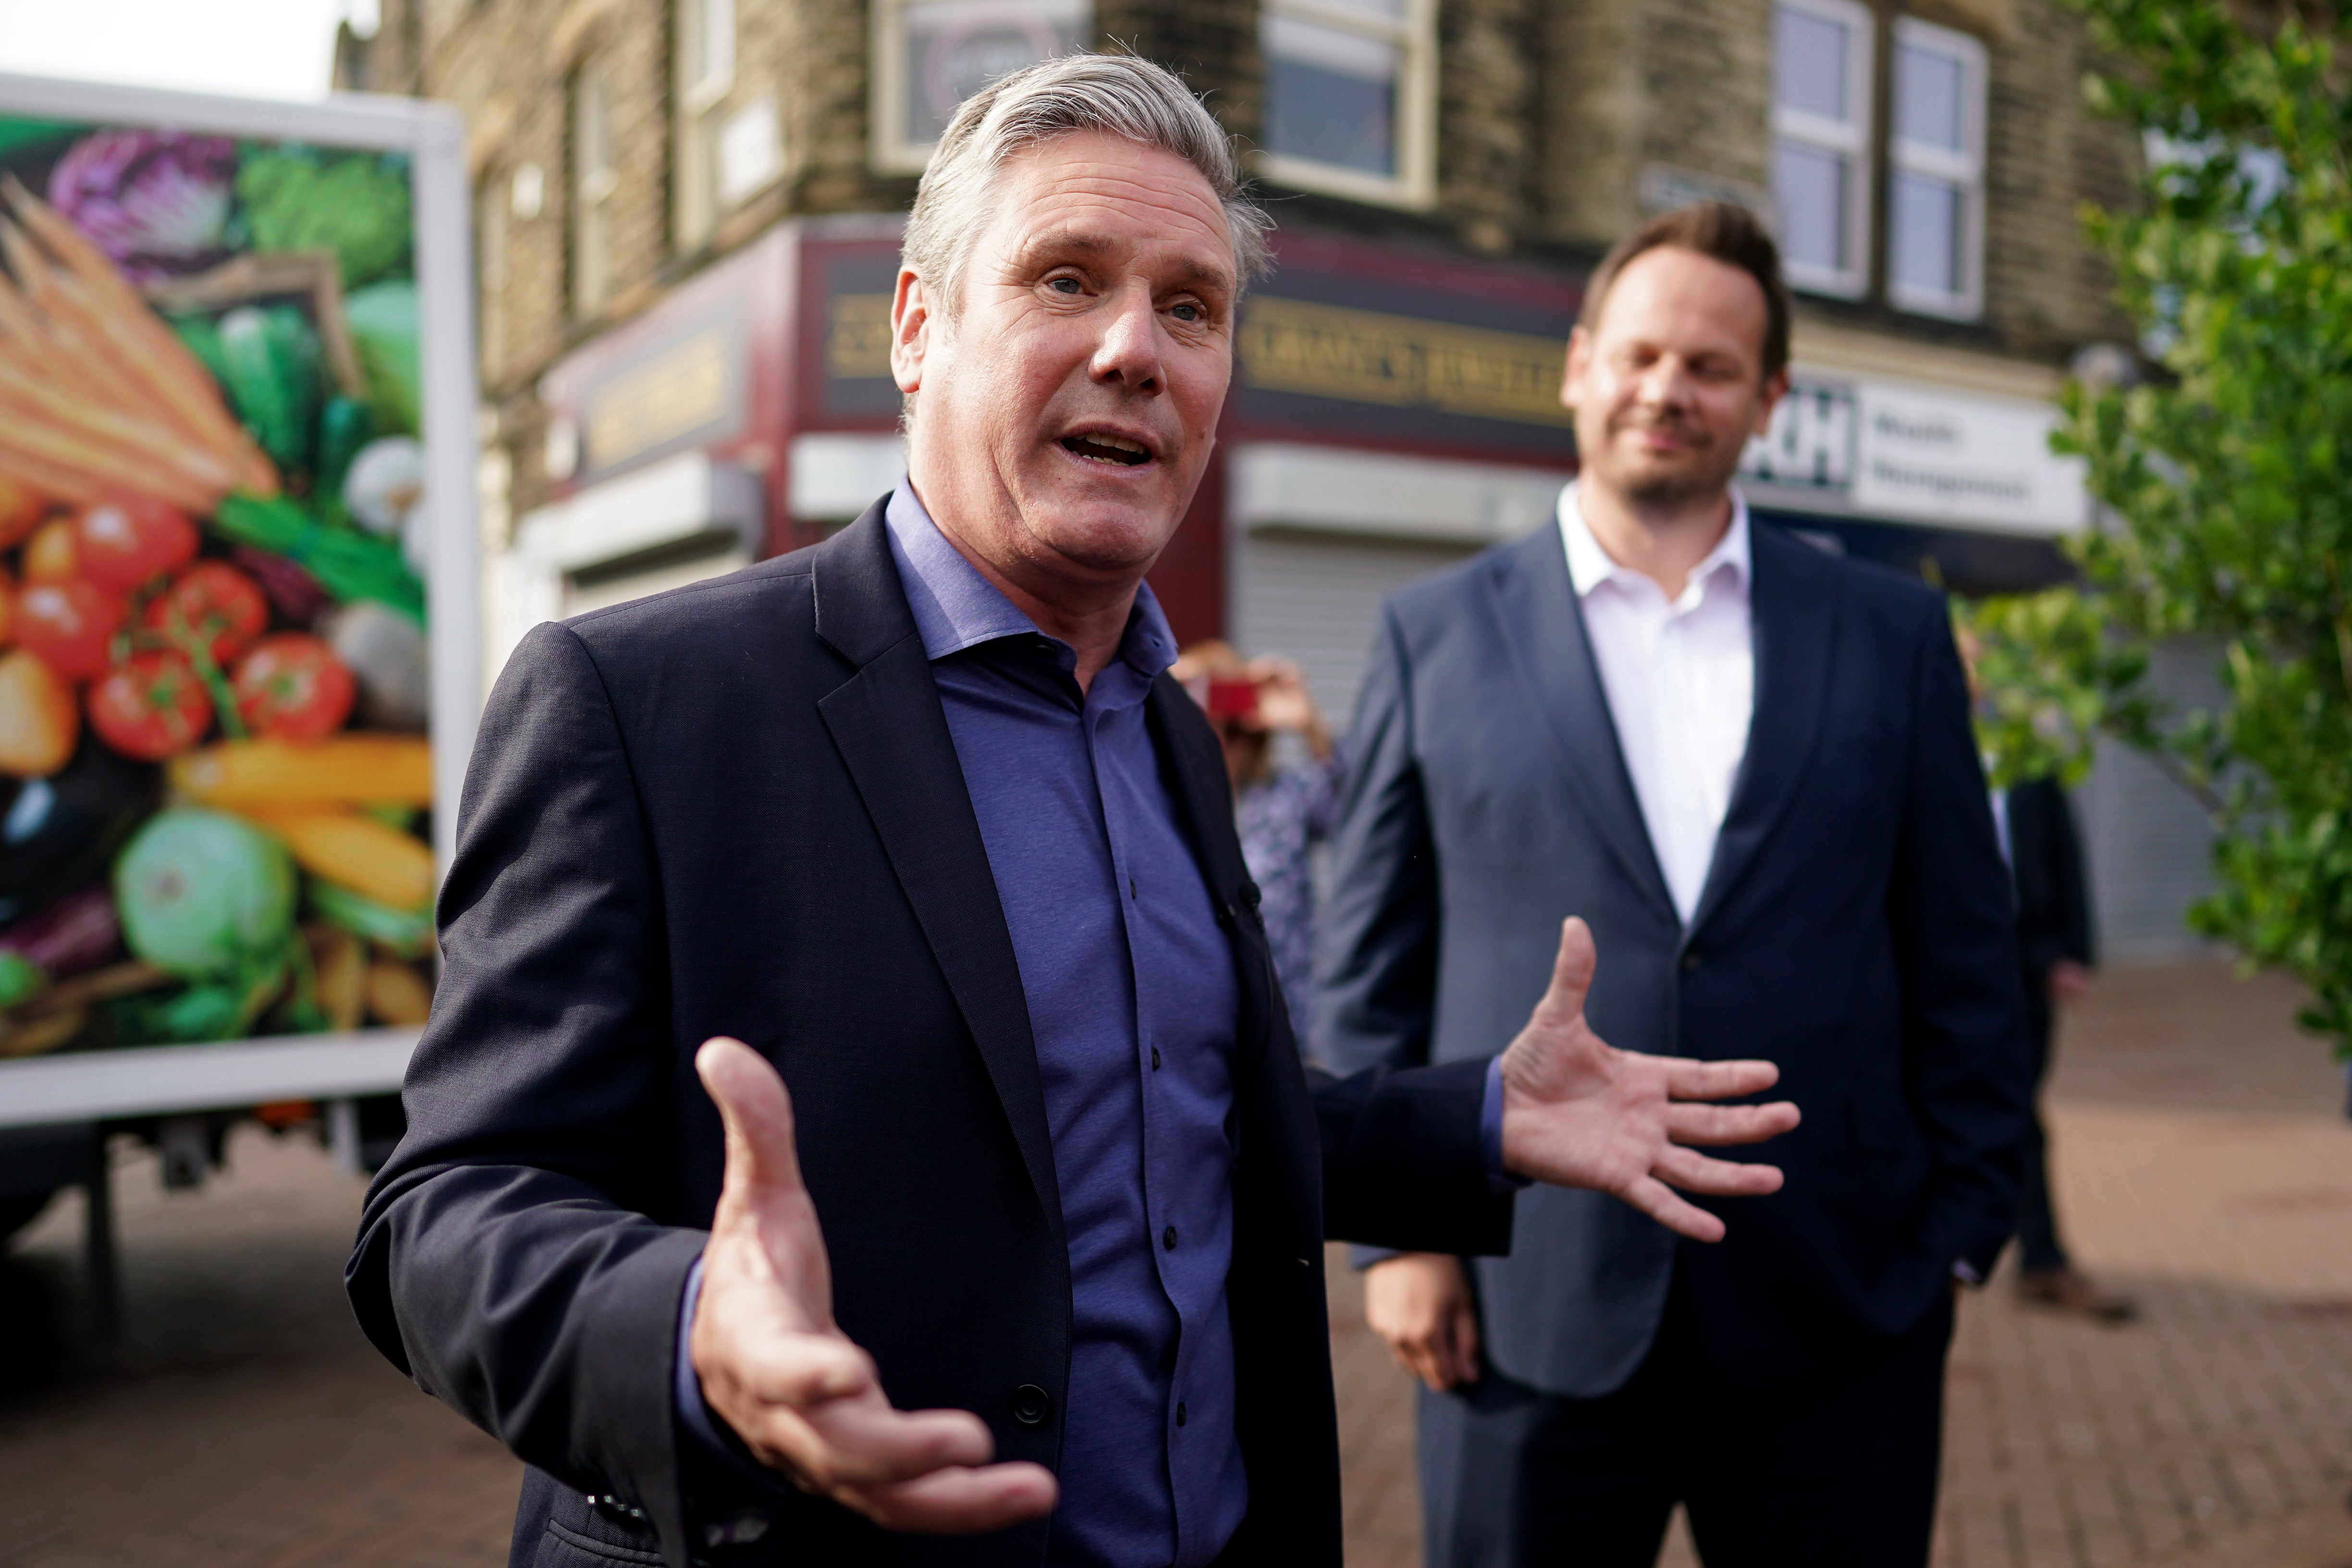 Keir Starmer at a press conference following Labour’s Wakefield by-election win on June 24, 2022